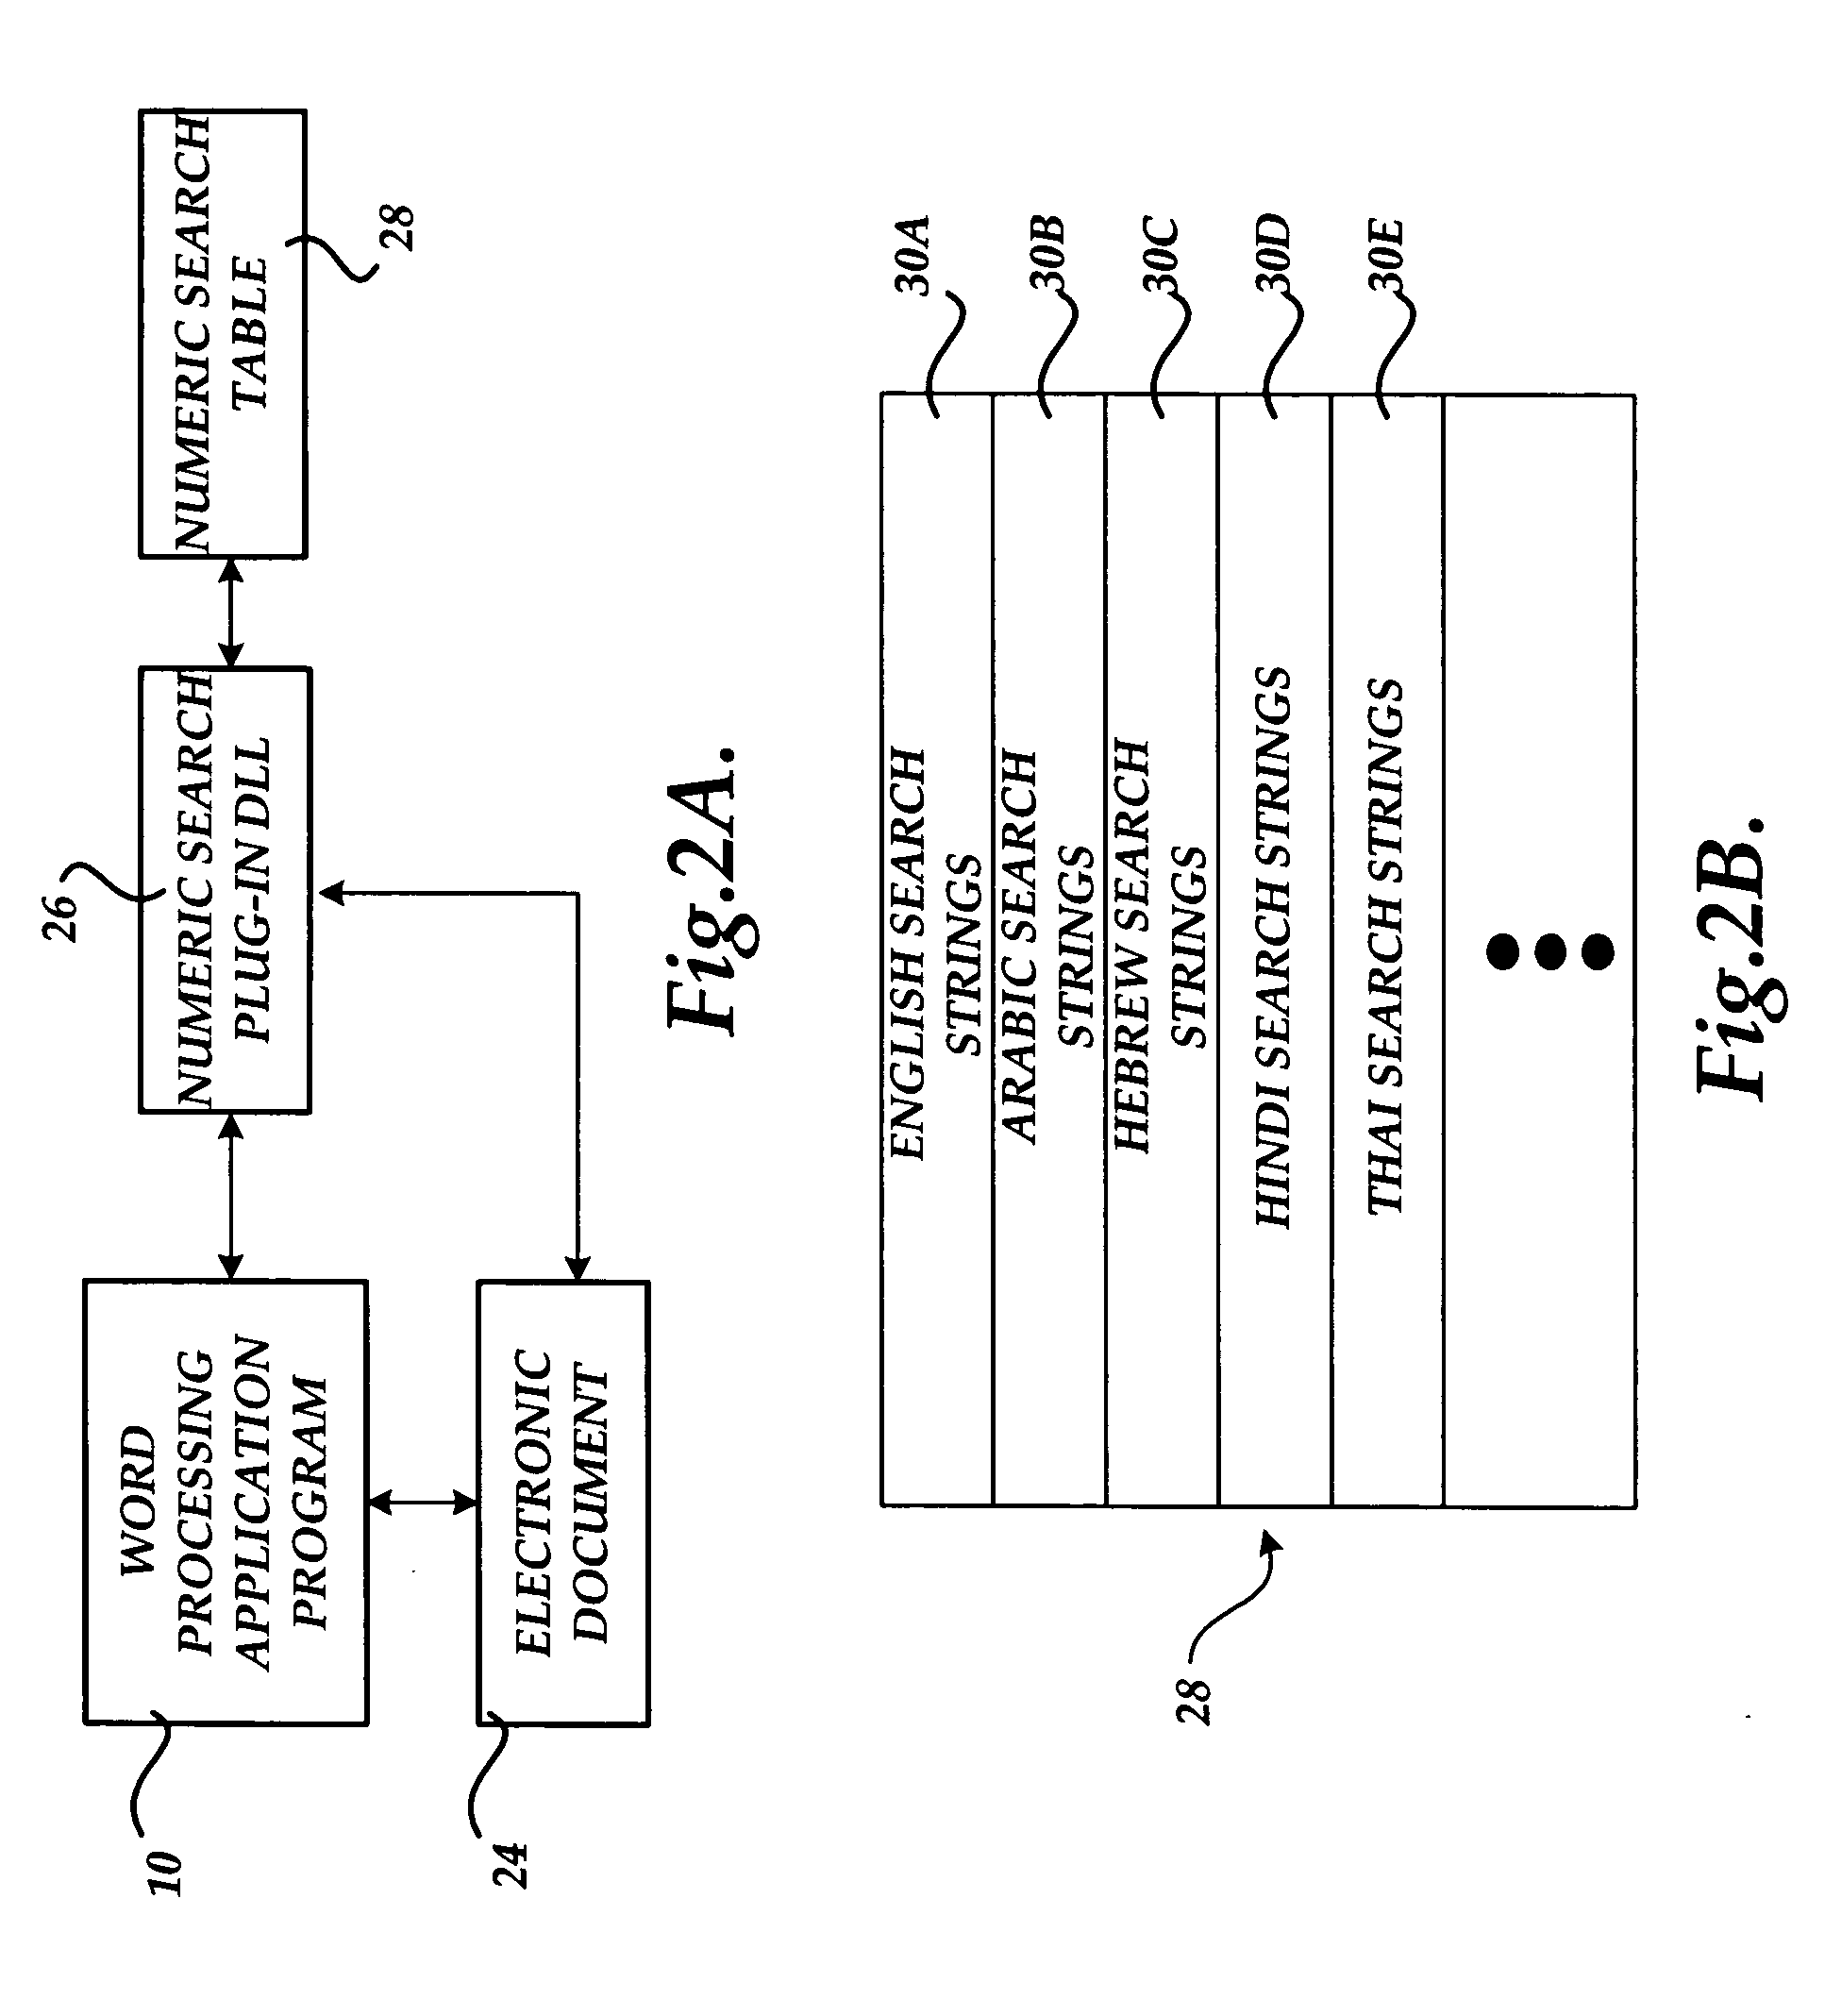 Method and apparatus for visually emphasizing numerical data contained within an electronic document